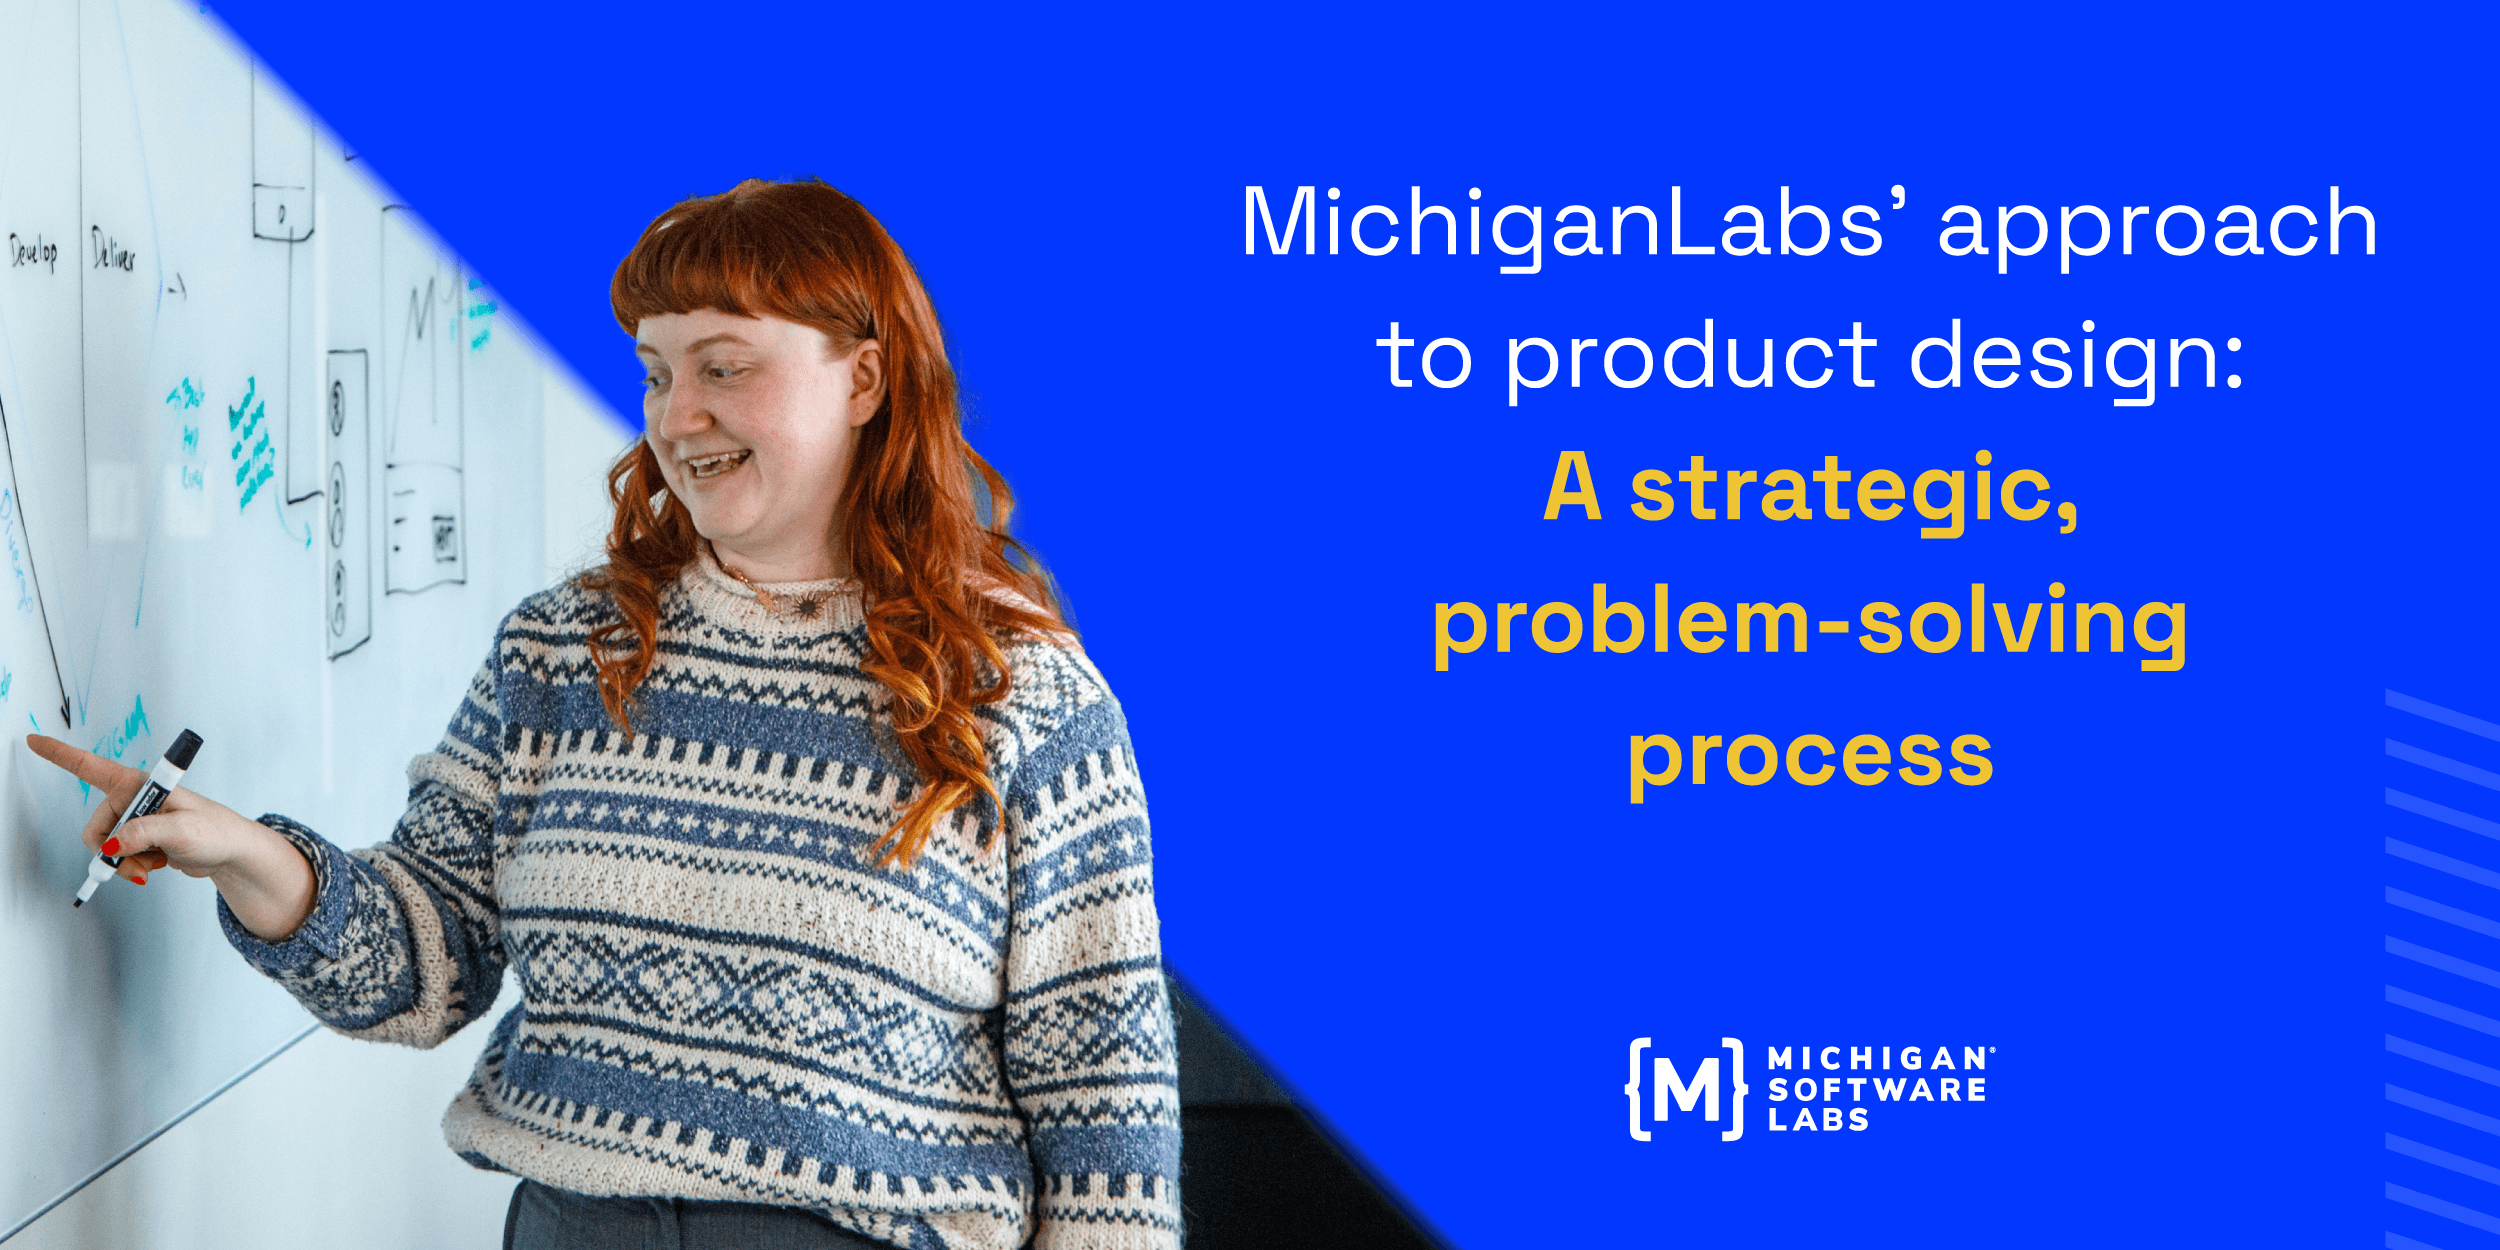 MichiganLabs’ approach to product design: A strategic, problem-solving process